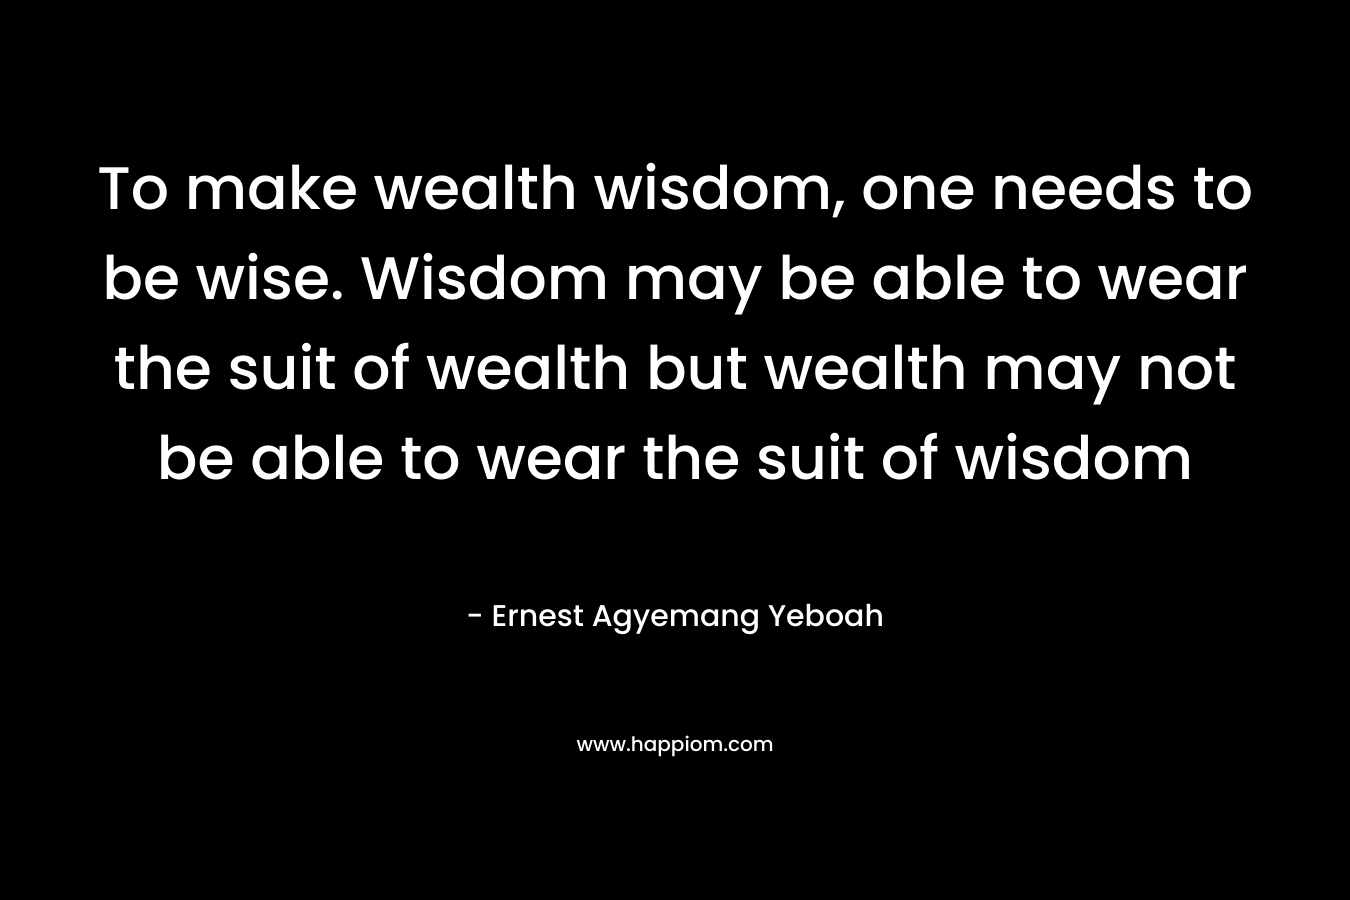 To make wealth wisdom, one needs to be wise. Wisdom may be able to wear the suit of wealth but wealth may not be able to wear the suit of wisdom